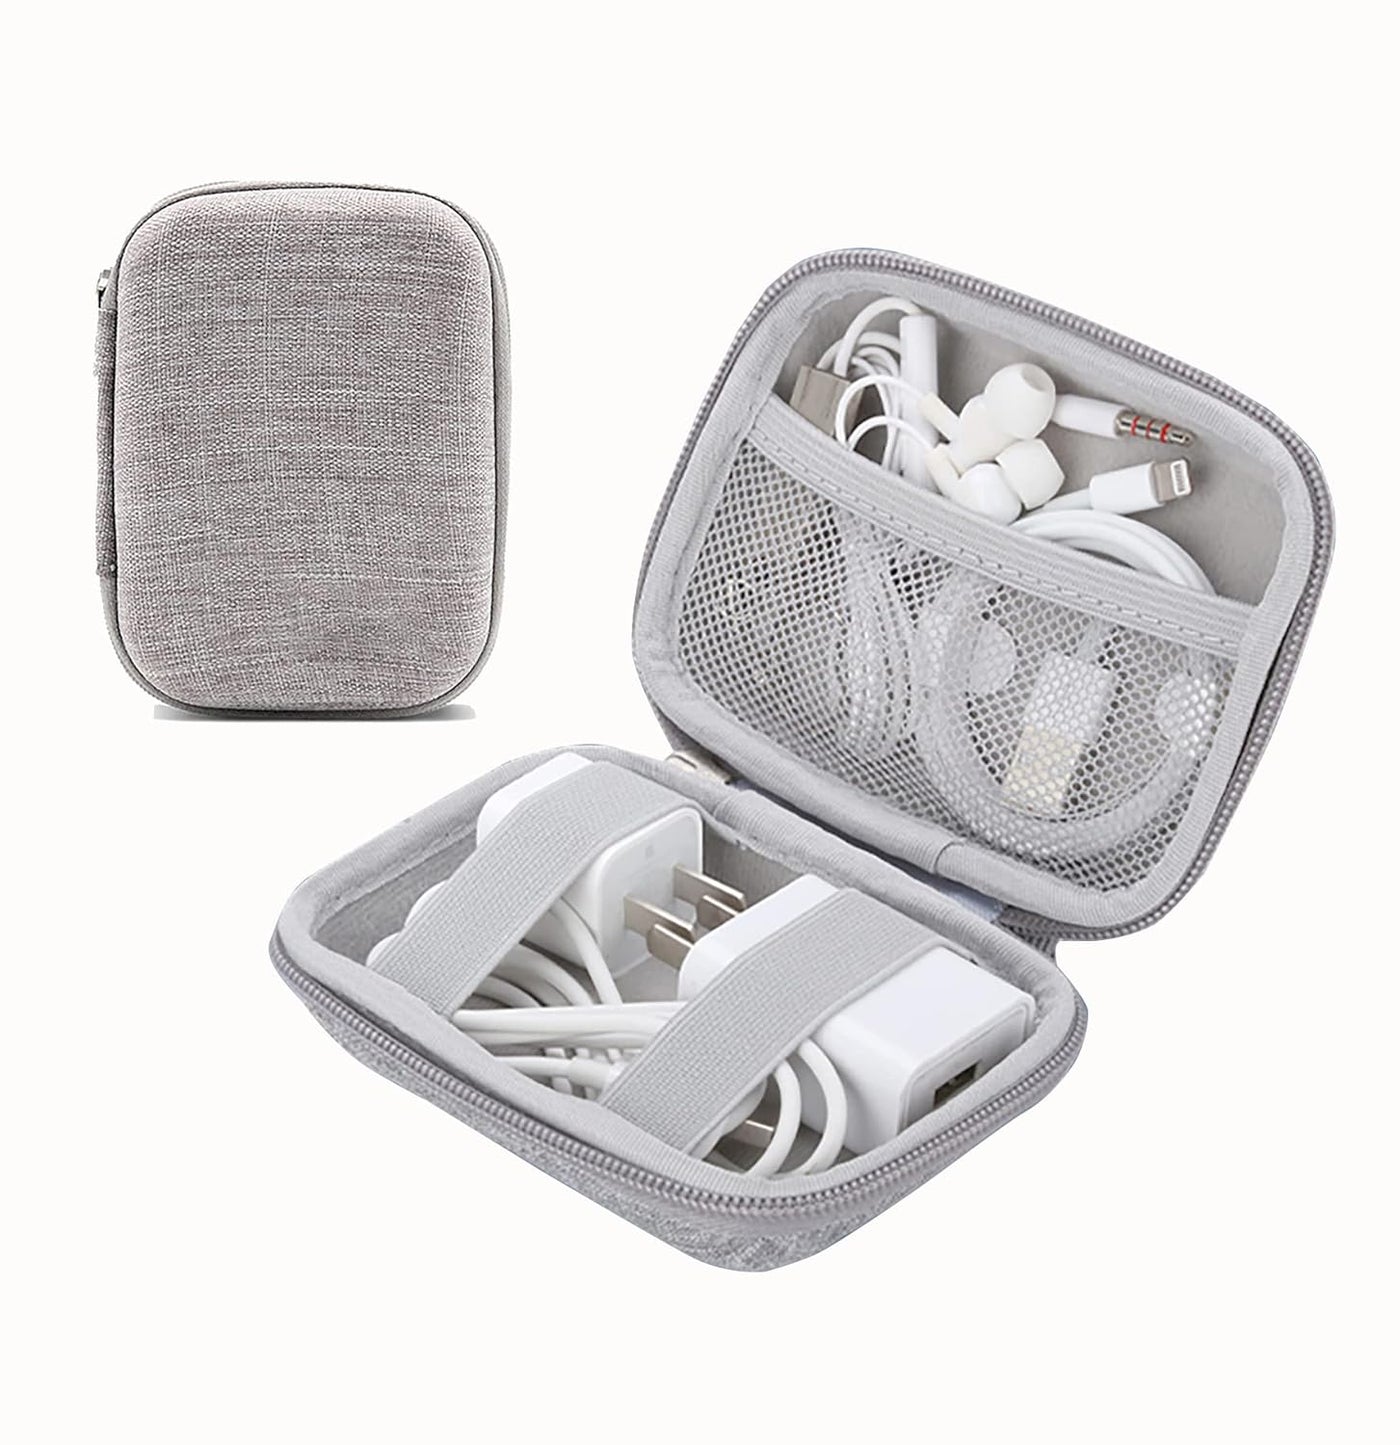 Portable Tech Organizer for Cable, Cord, Adapter, Key Earphone (Grey, Polyester)